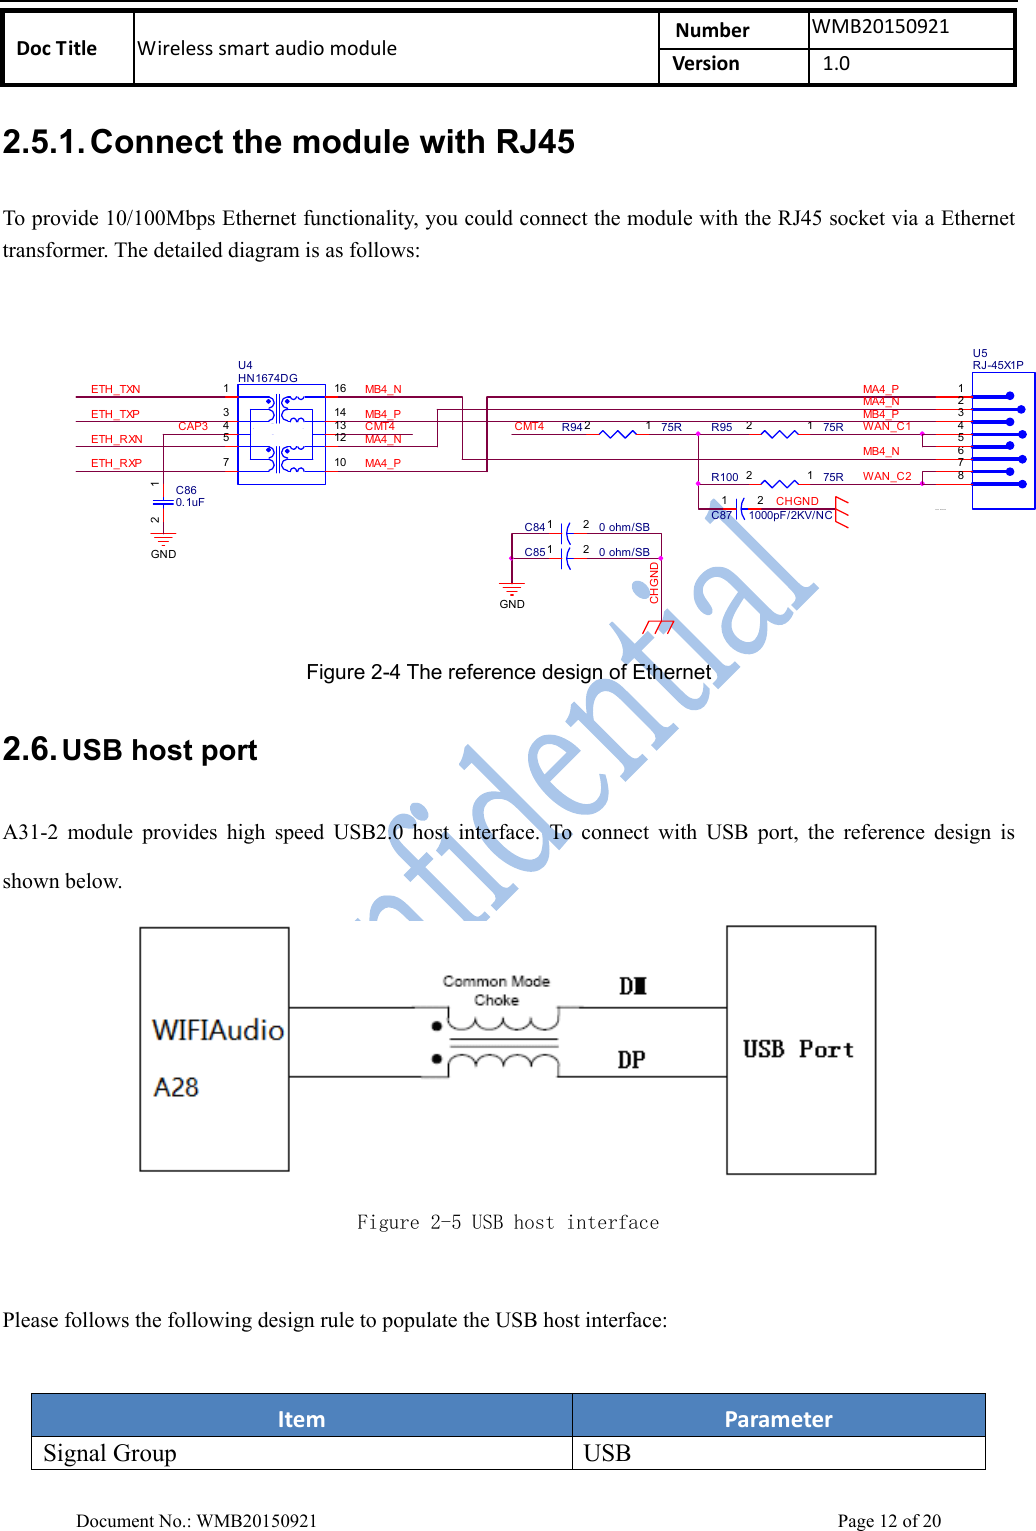    DocTitle Wirelesssmartaudiomodule Number WMB20150921Version 1.0 Document No.: WMB20150921    Page 12 of 20 2.5.1. Connect the module with RJ45   To provide 10/100Mbps Ethernet functionality, you could connect the module with the RJ45 socket via a Ethernet transformer. The detailed diagram is as follows:   R100 75R12R95 75R12GNDU5RJ-45X1P12364578CHGNDC84 0 ohm/SB1 2GNDC85 0 ohm/SB1 2WAN_C2ETH_RXPETH_RXNWAN_C1ETH_TXPETH_TXNMB4_P MB4_PLAN PORT1MA4_PCAP3 CMT4CHGNDMA4_NMB4_NMA4_NMA4_PCMT4MB4_NC860.1uF12RXTXD XU4HN1674DG135716141312104R94 75R12C87 1000pF/2KV/NC1 2 Figure 2-4 The reference design of Ethernet 2.6. USB host port  A31-2  module  provides  high  speed  USB2.0  host  interface.  To  connect  with  USB  port,  the  reference  design  is shown below.      Figure 2-5 USB host interface  Please follows the following design rule to populate the USB host interface:    Item ParameterSignal Group USB 